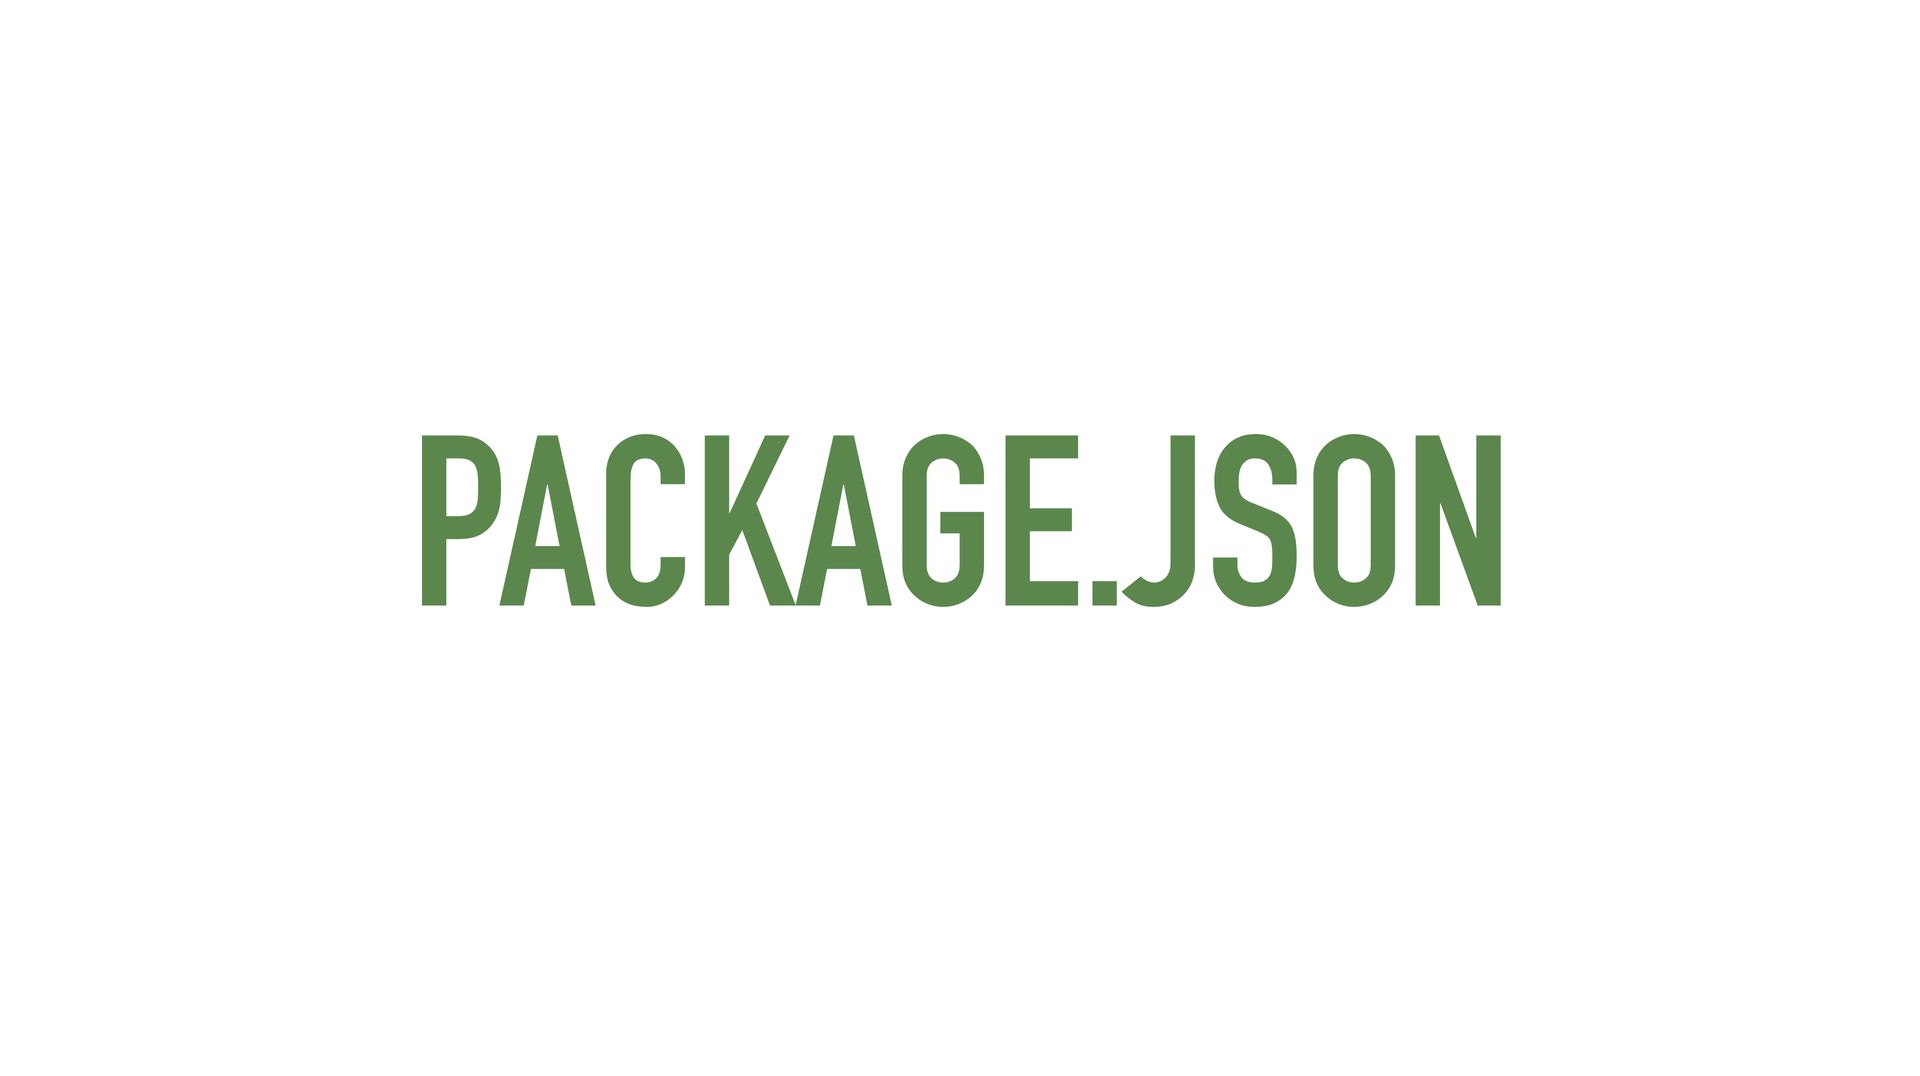 Slide text: package.json